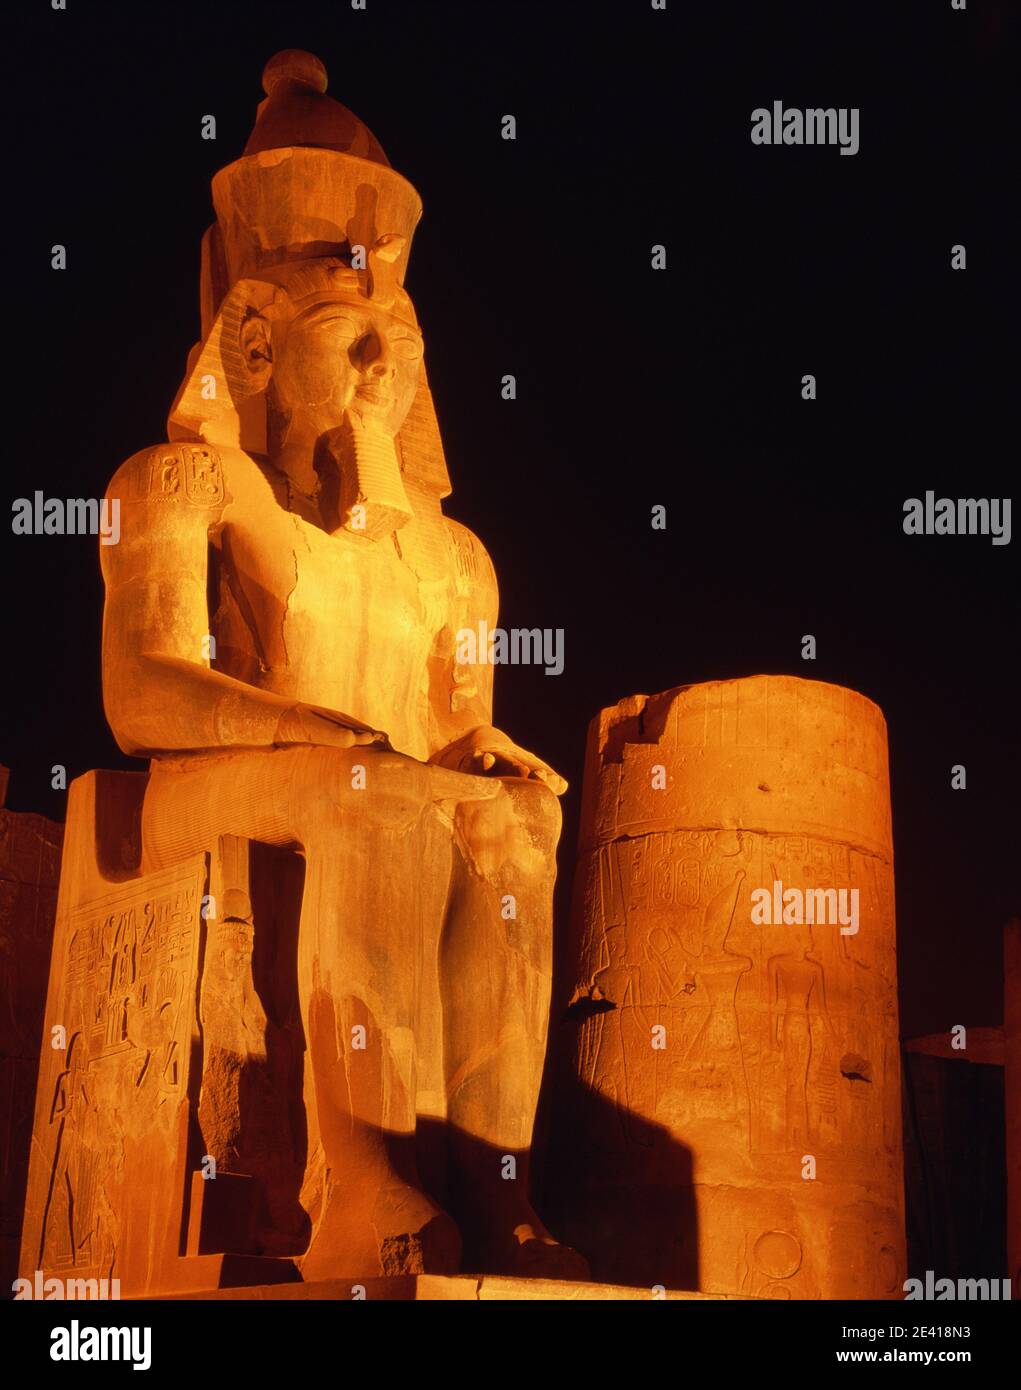 North Africa Egypt Luxor temple statue of Ramesses II illuminated lit up at night nightime with dark sky vertical Stock Photo